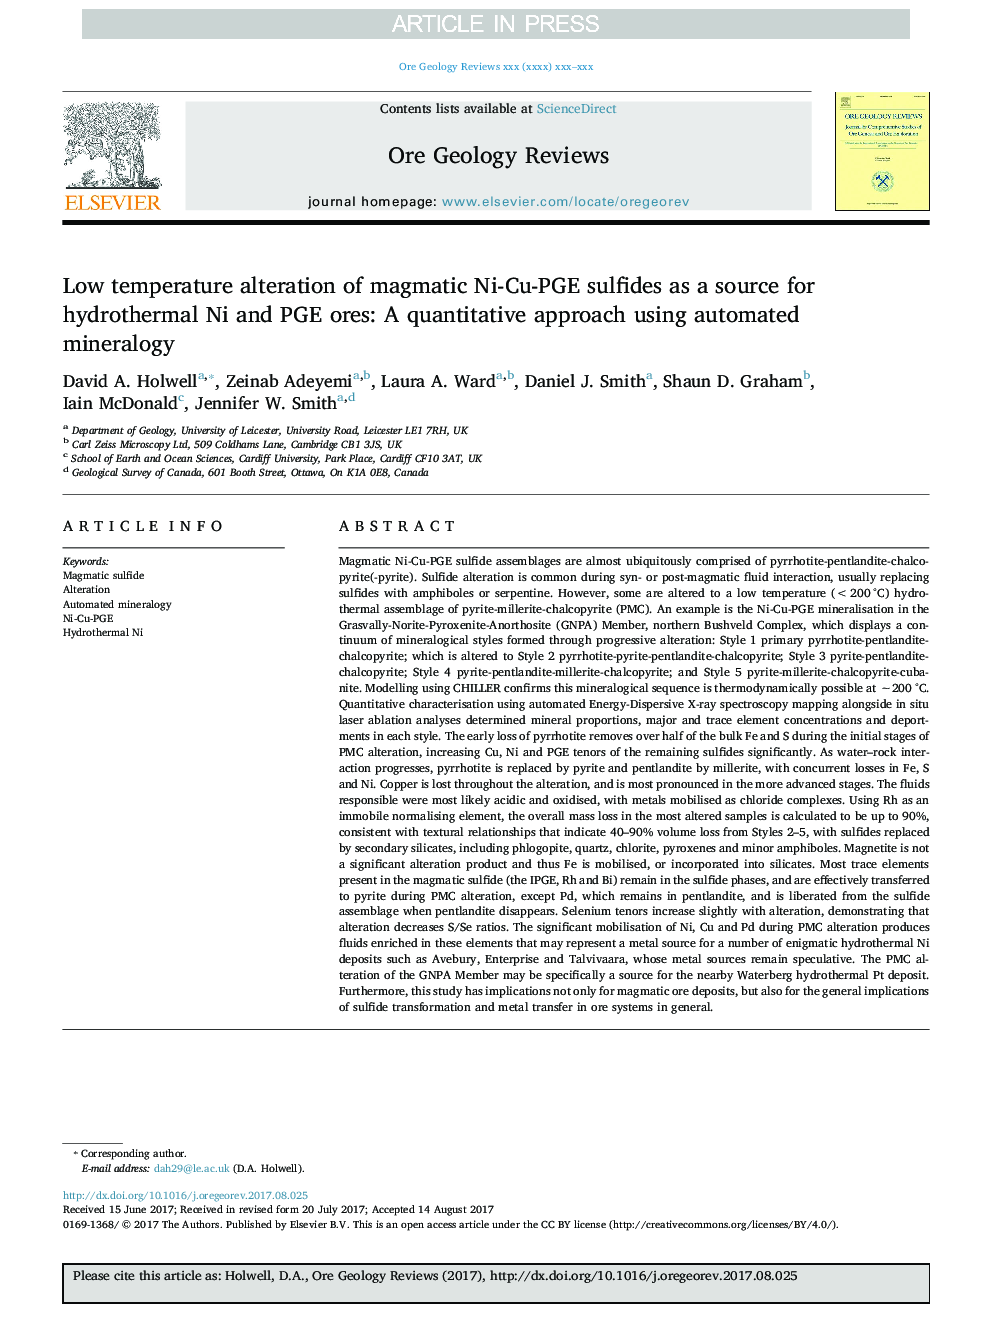 Low temperature alteration of magmatic Ni-Cu-PGE sulfides as a source for hydrothermal Ni and PGE ores: A quantitative approach using automated mineralogy